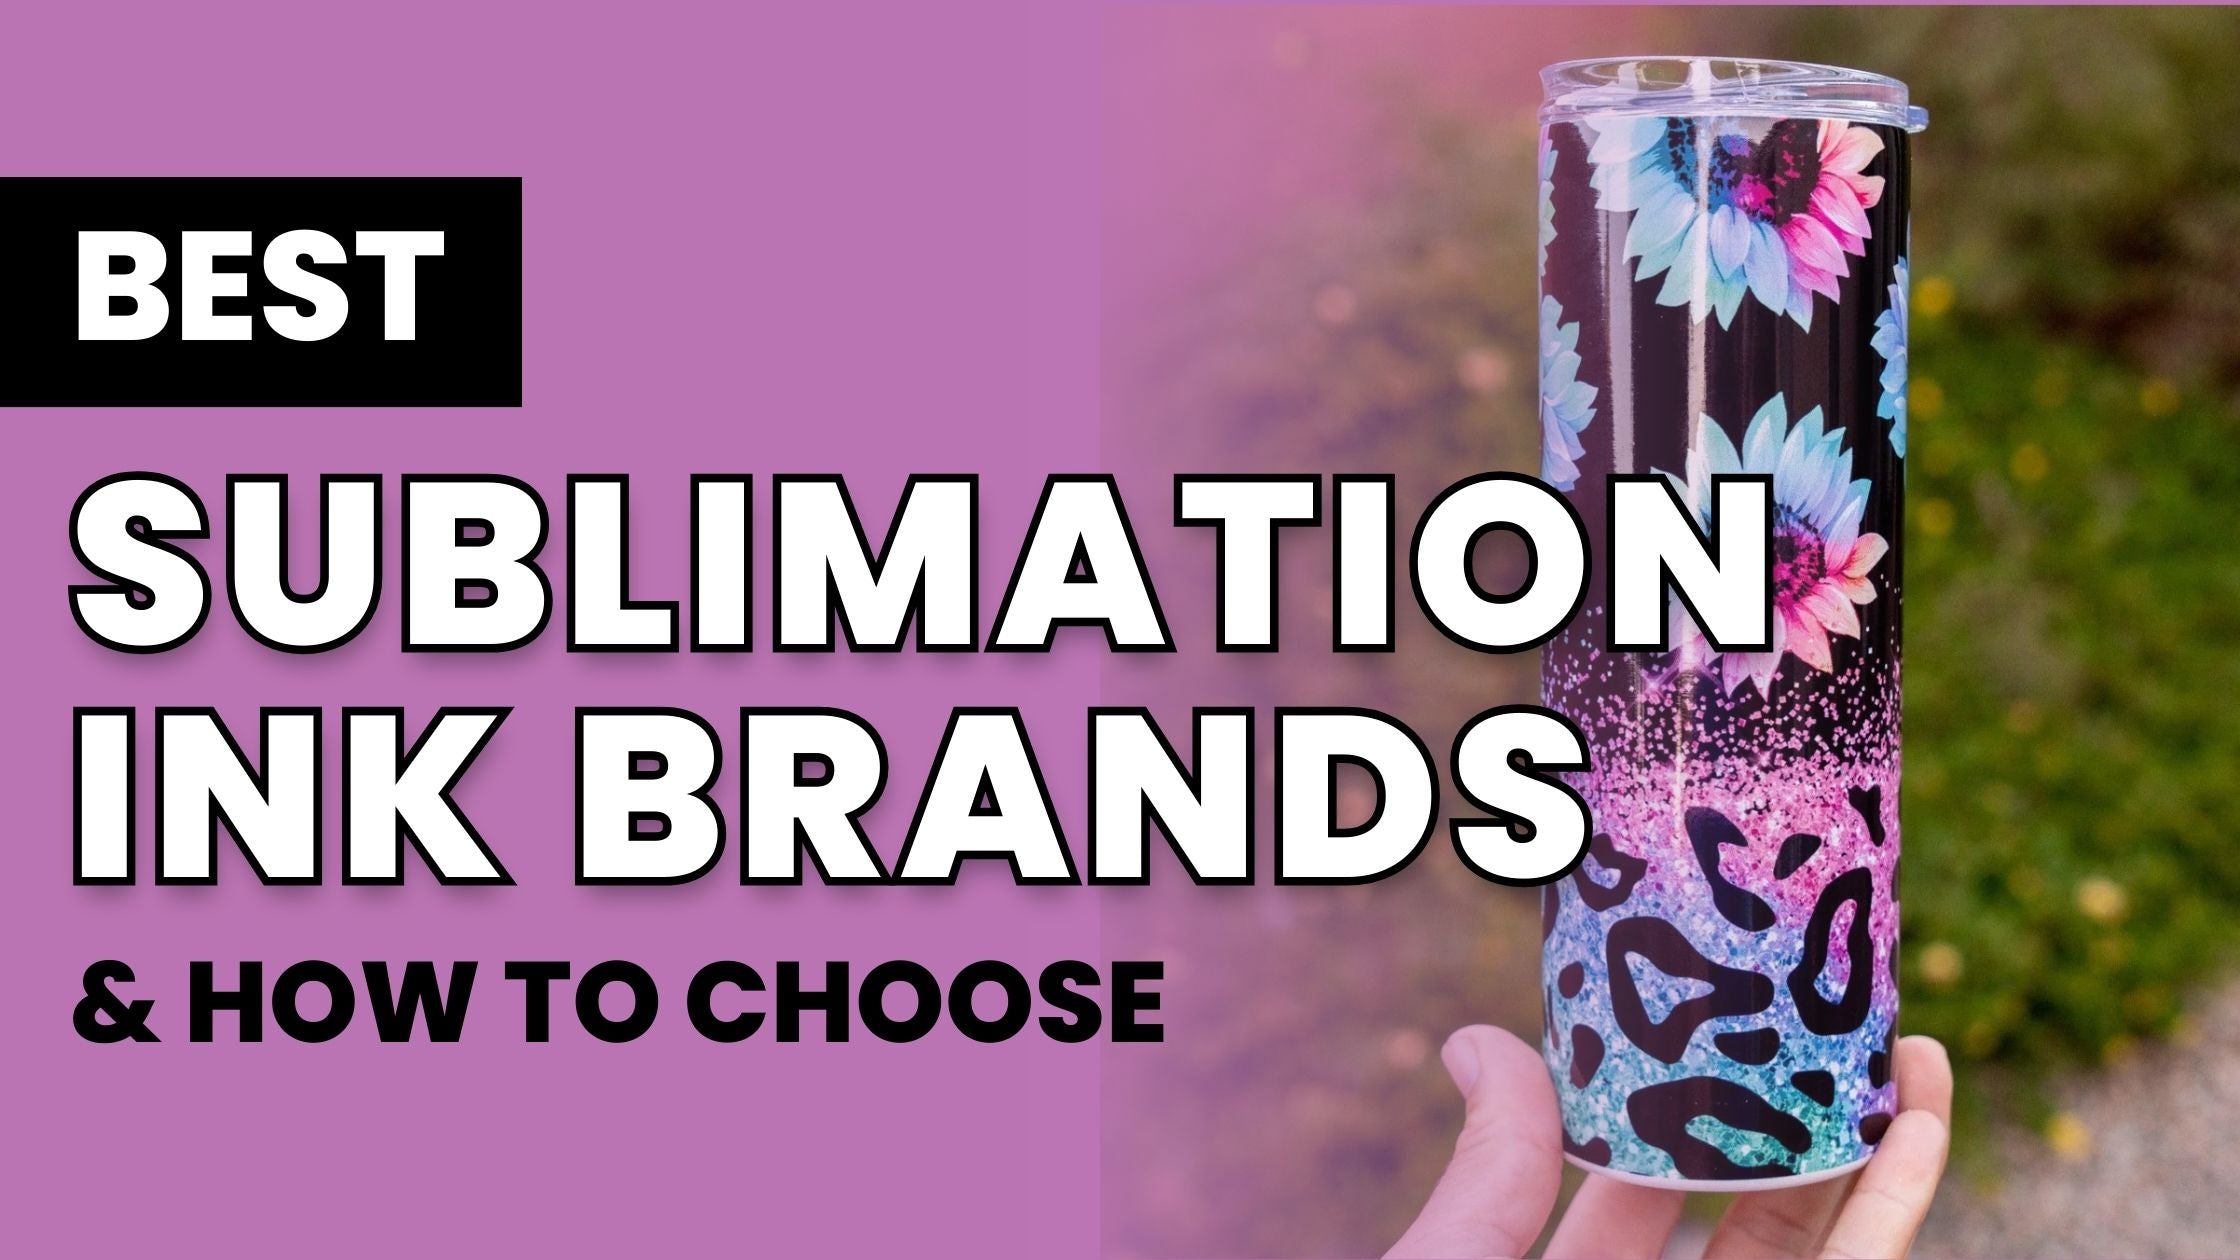 Sublimation Paper Comparison: Which is best? - Angie Holden The